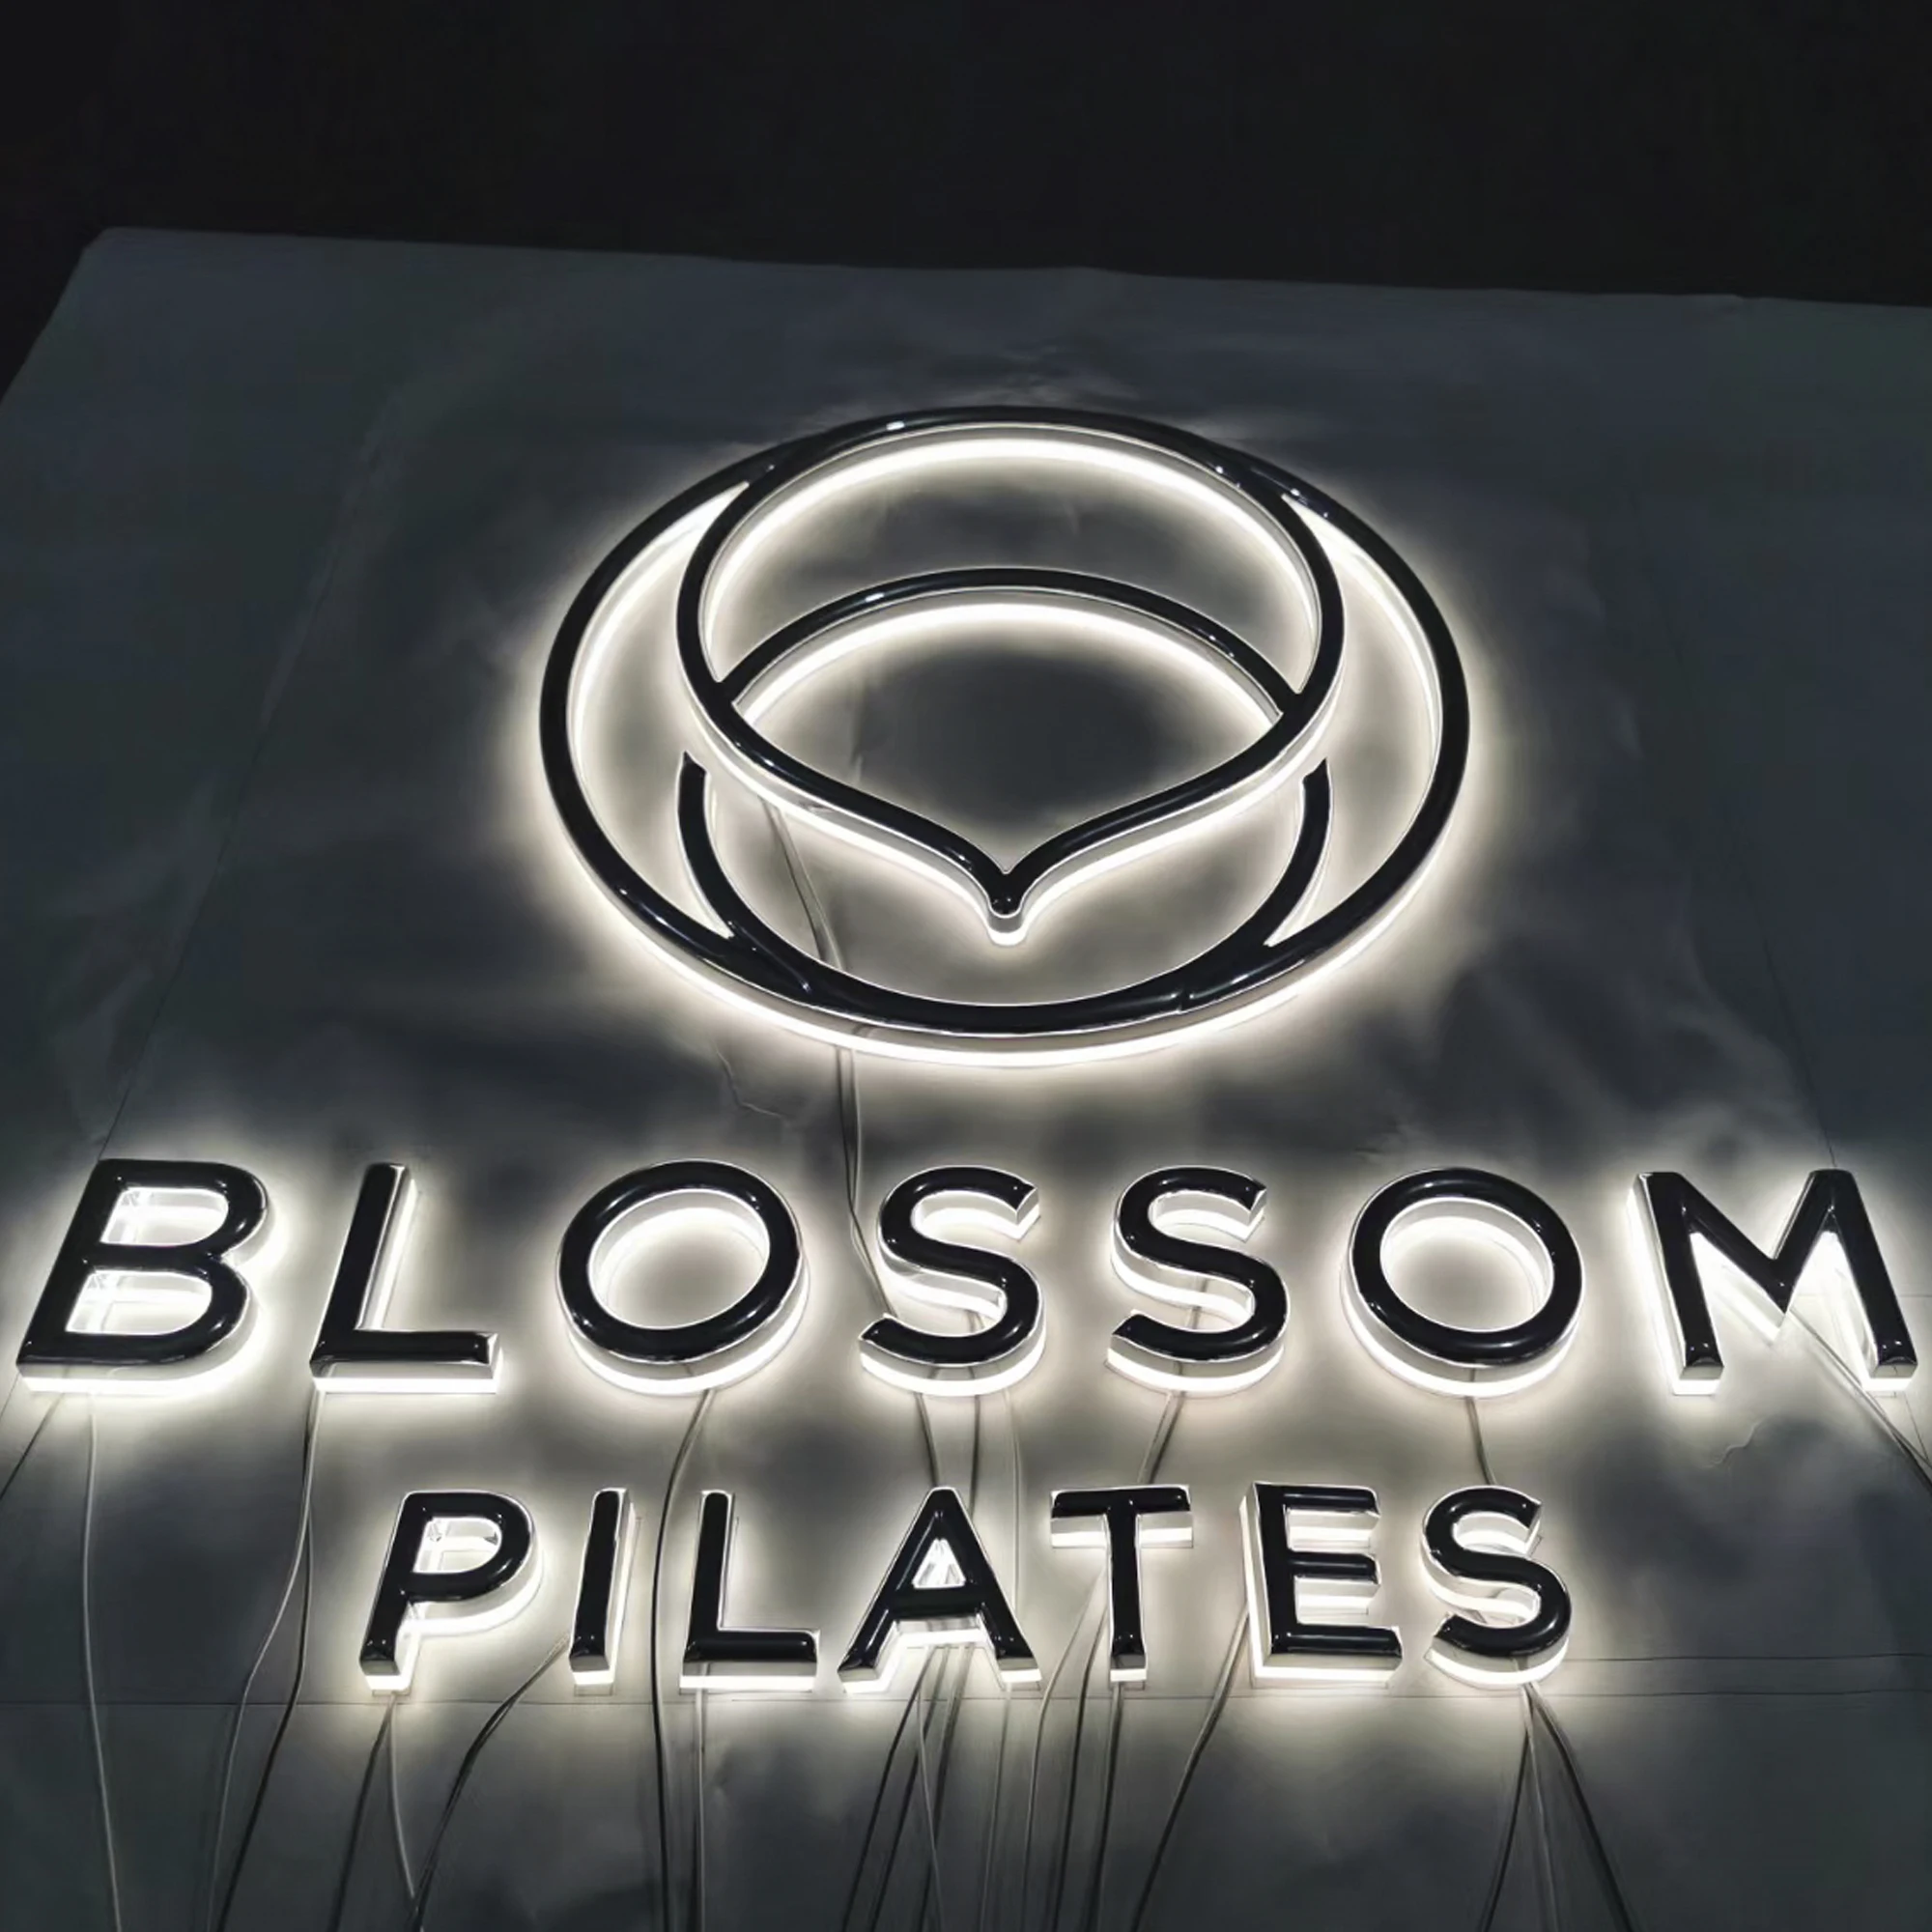 3D mirror Stainless steel LED illuminated Channel letters sign